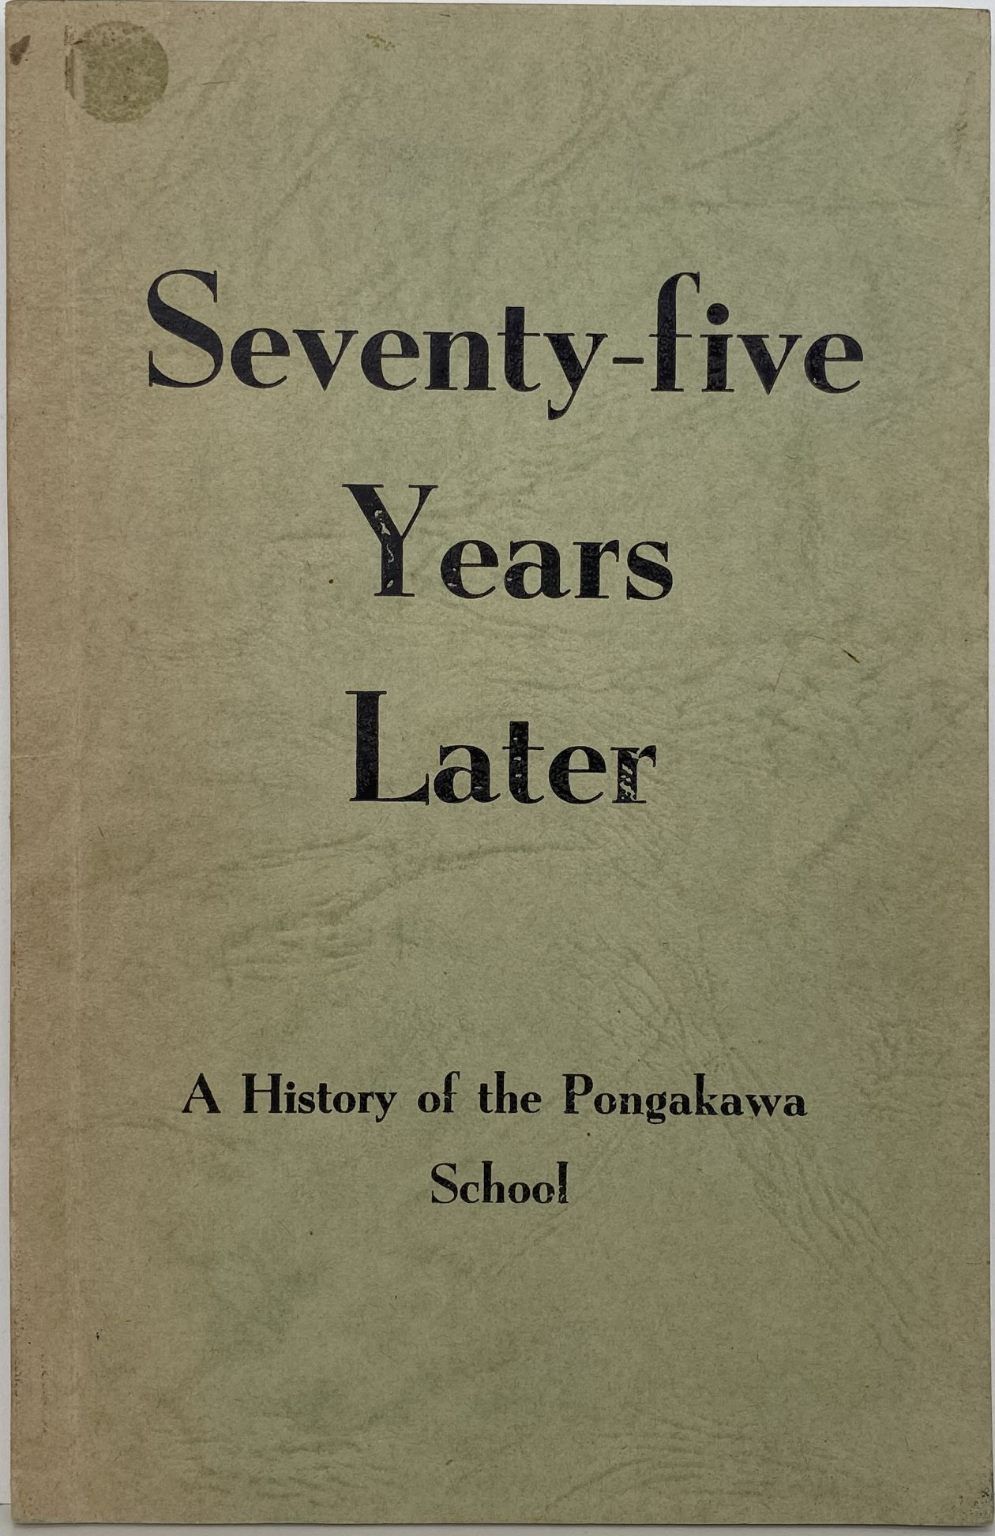 Seventy five Years Later - A History of the Pongakawa School